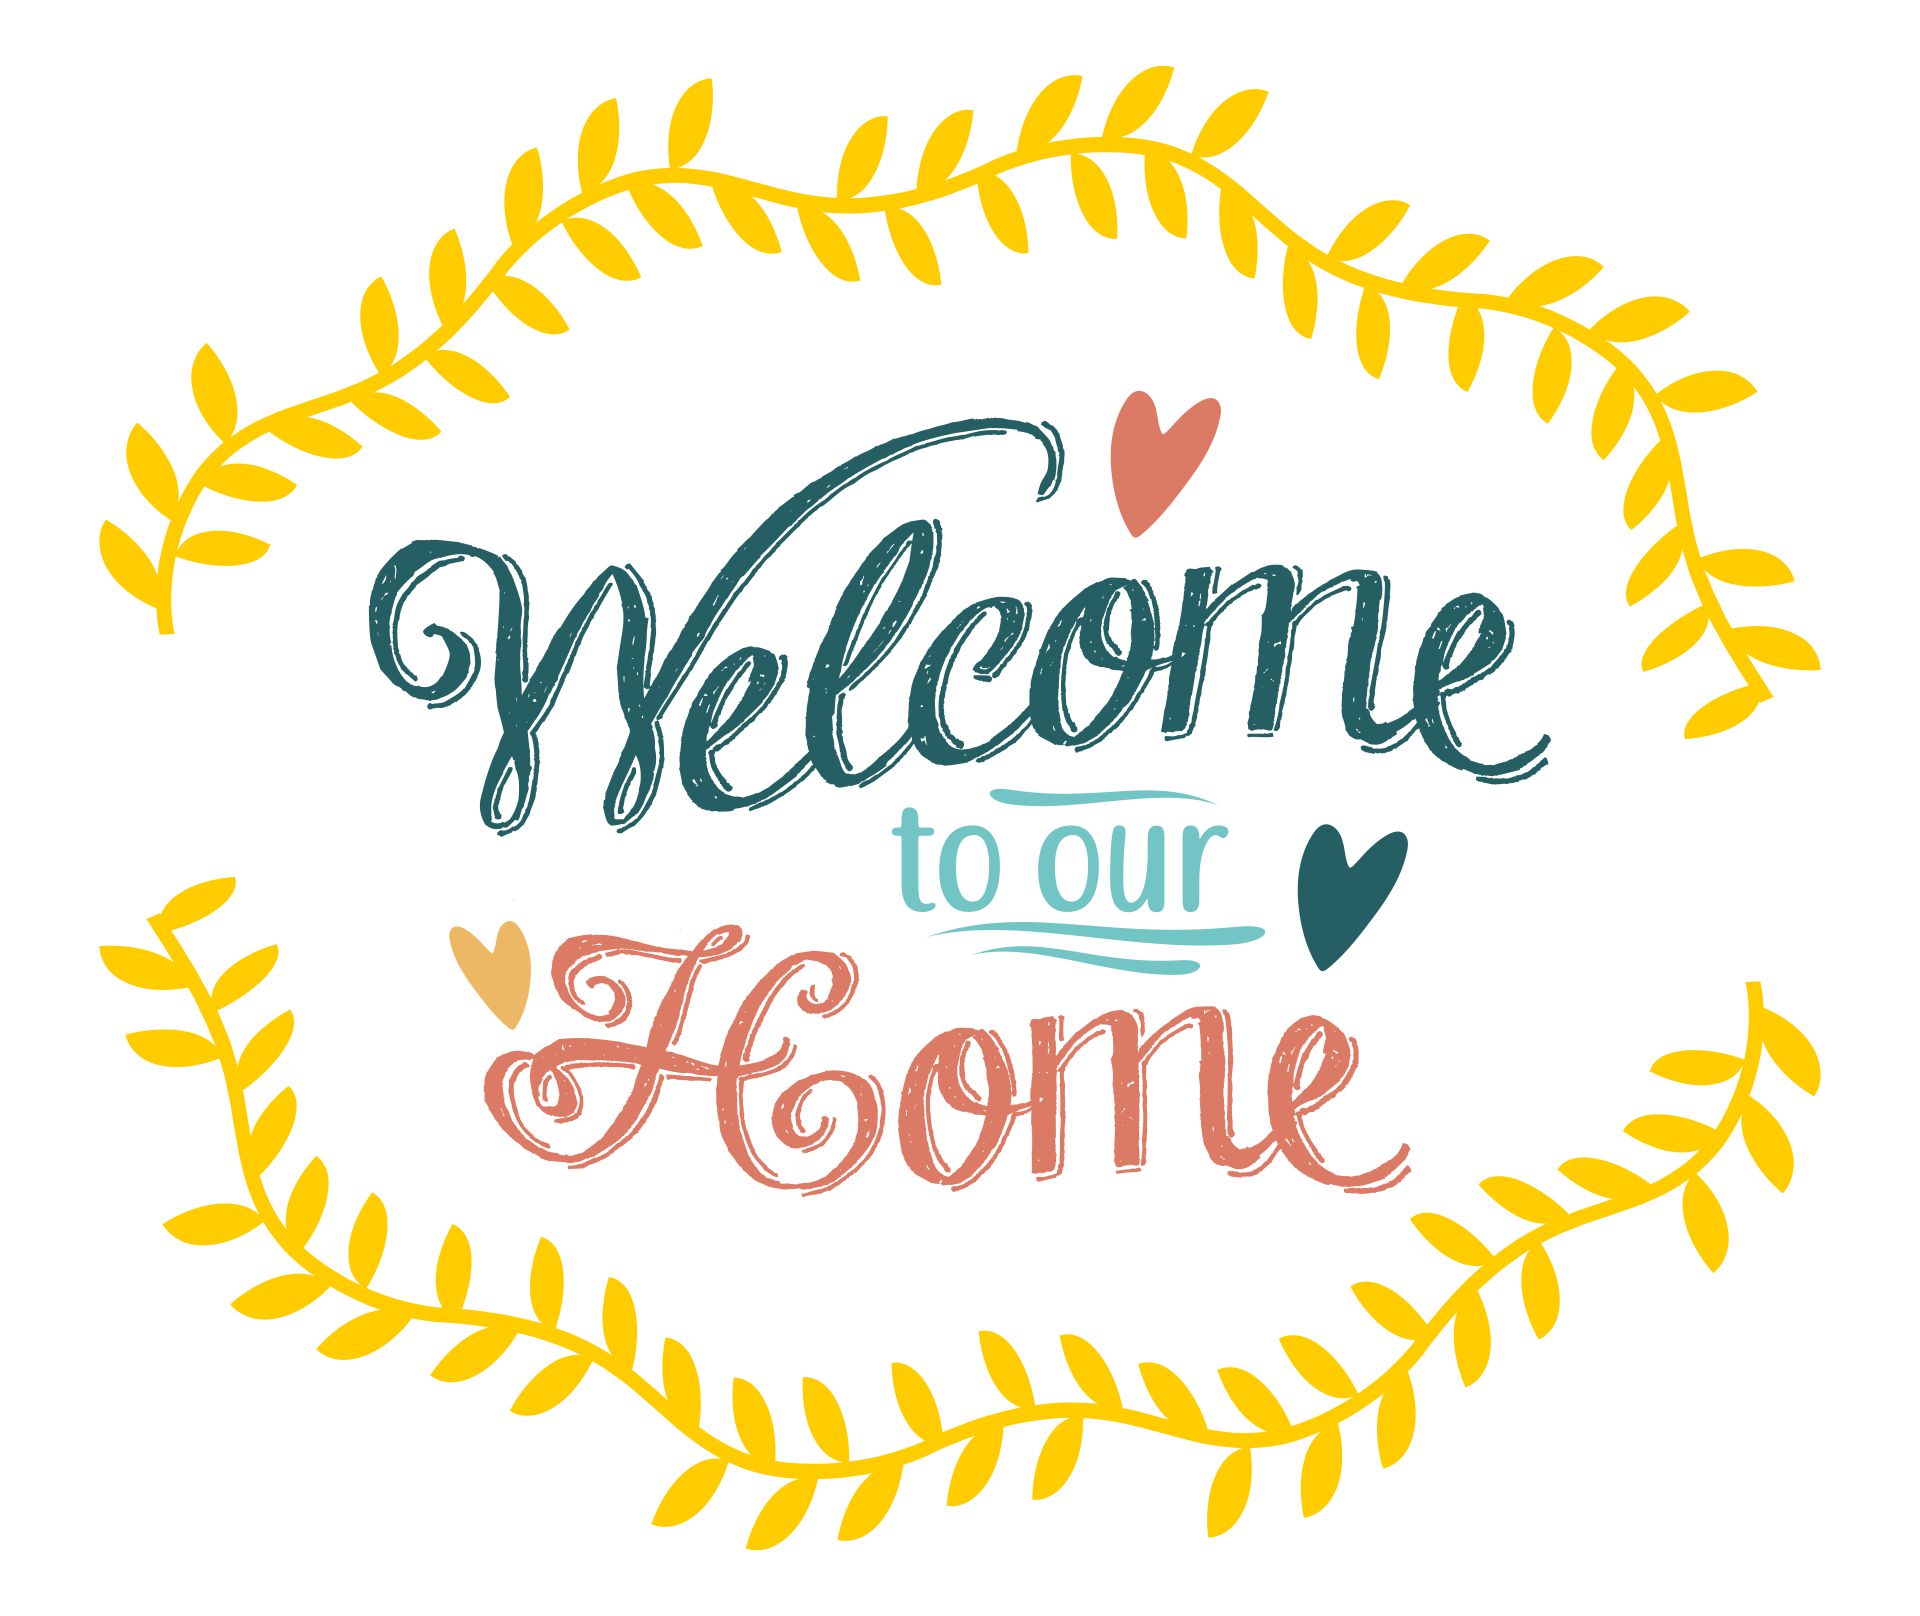 Welcome+Home+Banners+Printable  Welcome home banners, Welcome banner  printable, Welcome home signs